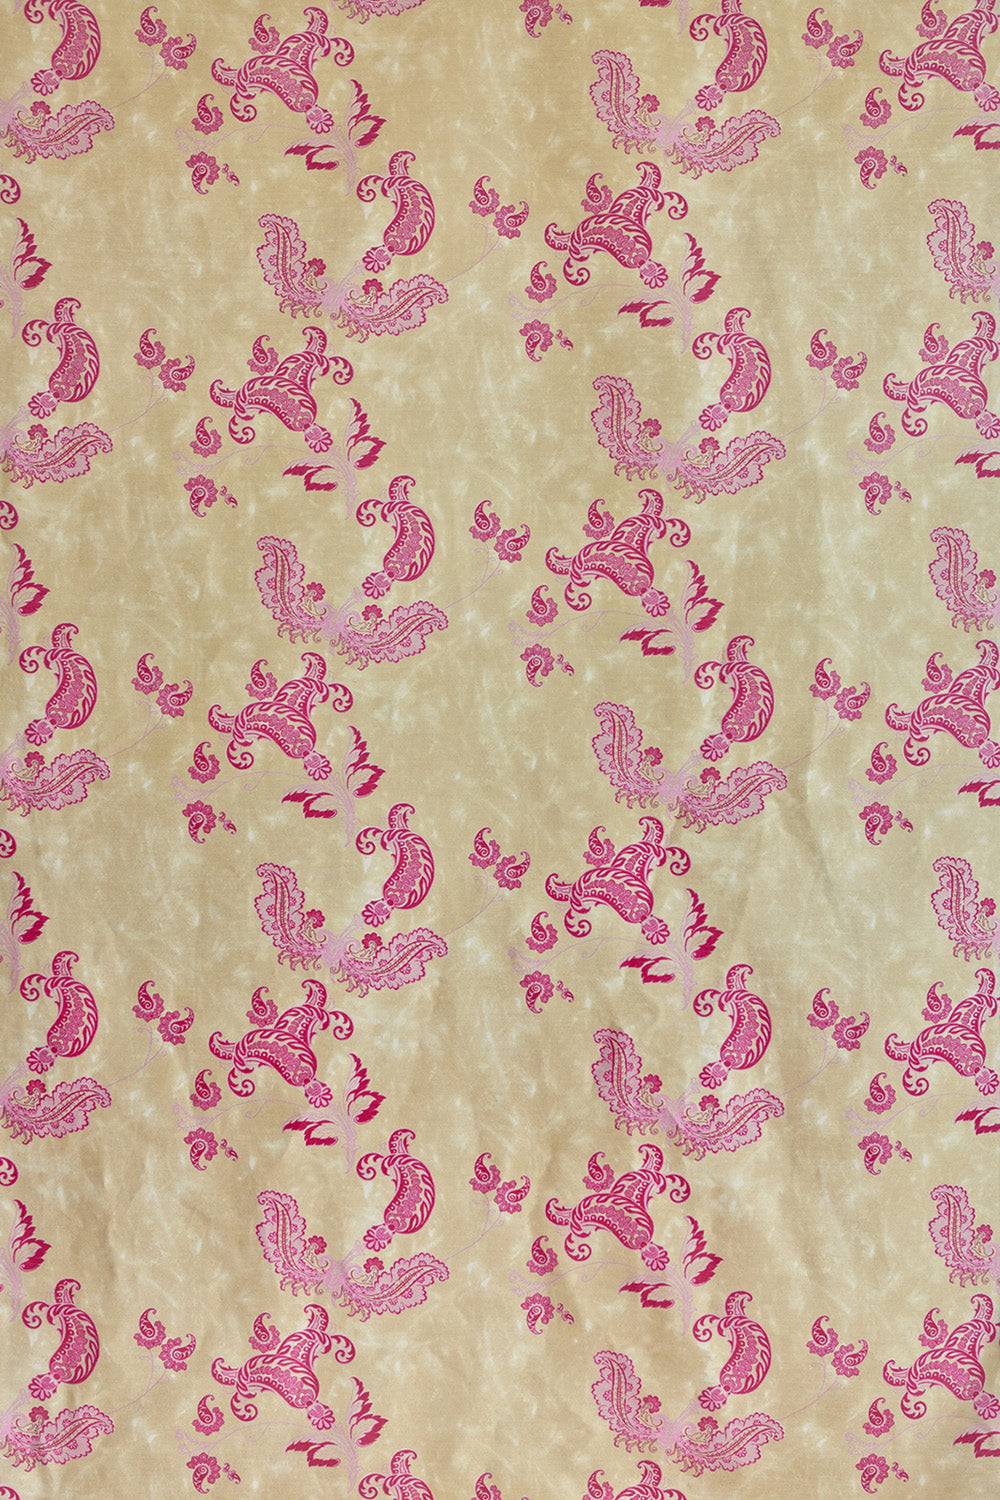 Paisley - Hot Pink on Tea Stain Fabric